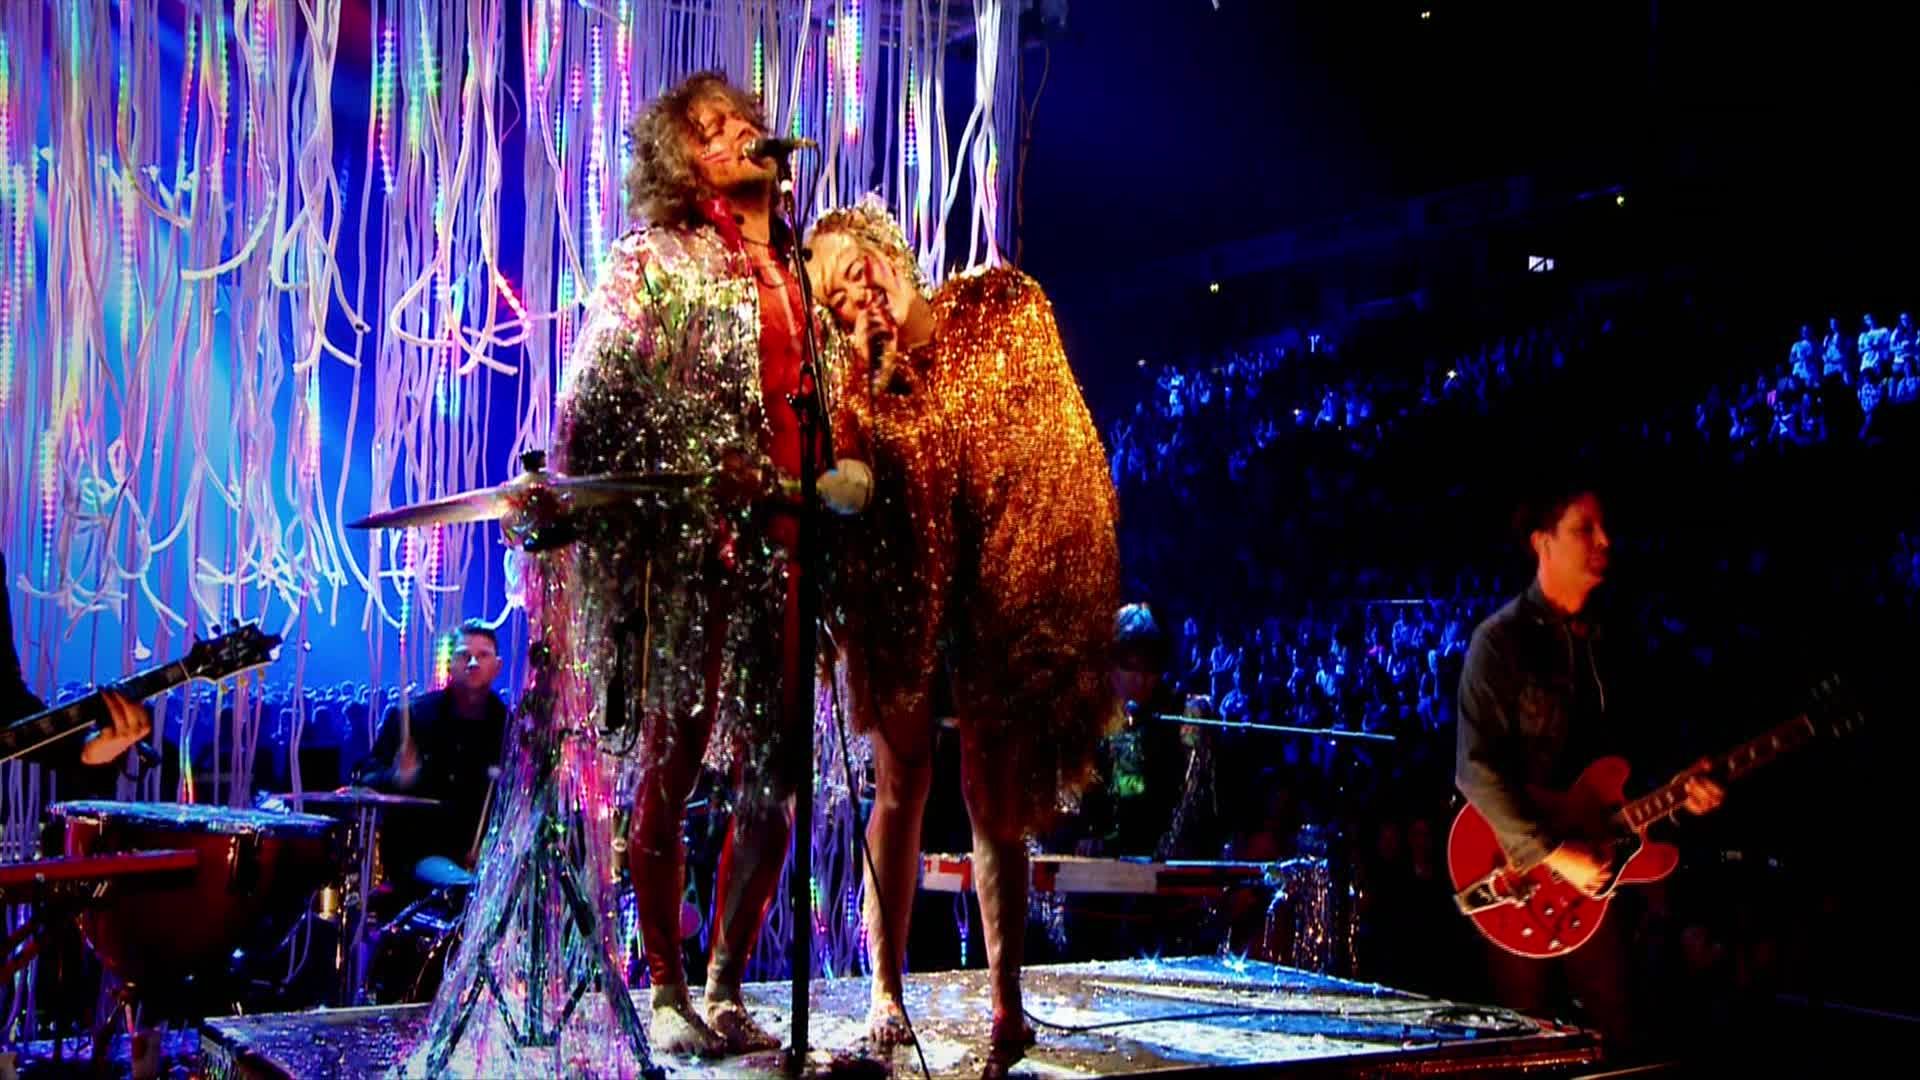 Miley Cyrus [ft The Flaming Lips] - 2014-05-18, Billboard Music Awards - 1080 TS - LSD preview 17